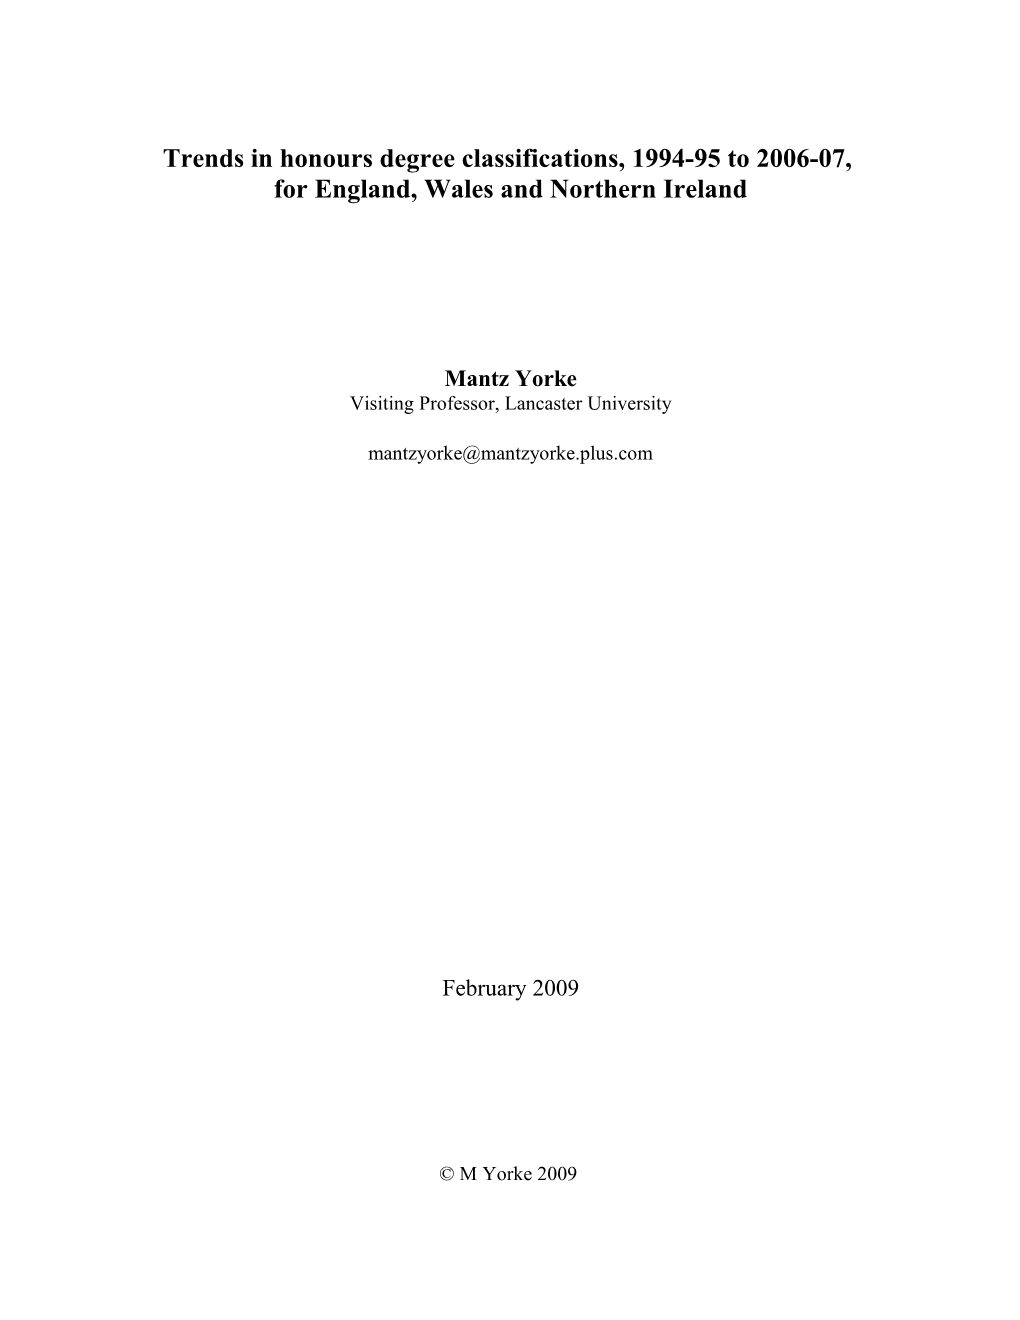 Trends in Honours Degree Classifications, 1994-95 to 2006-07, for England, Wales and Northern